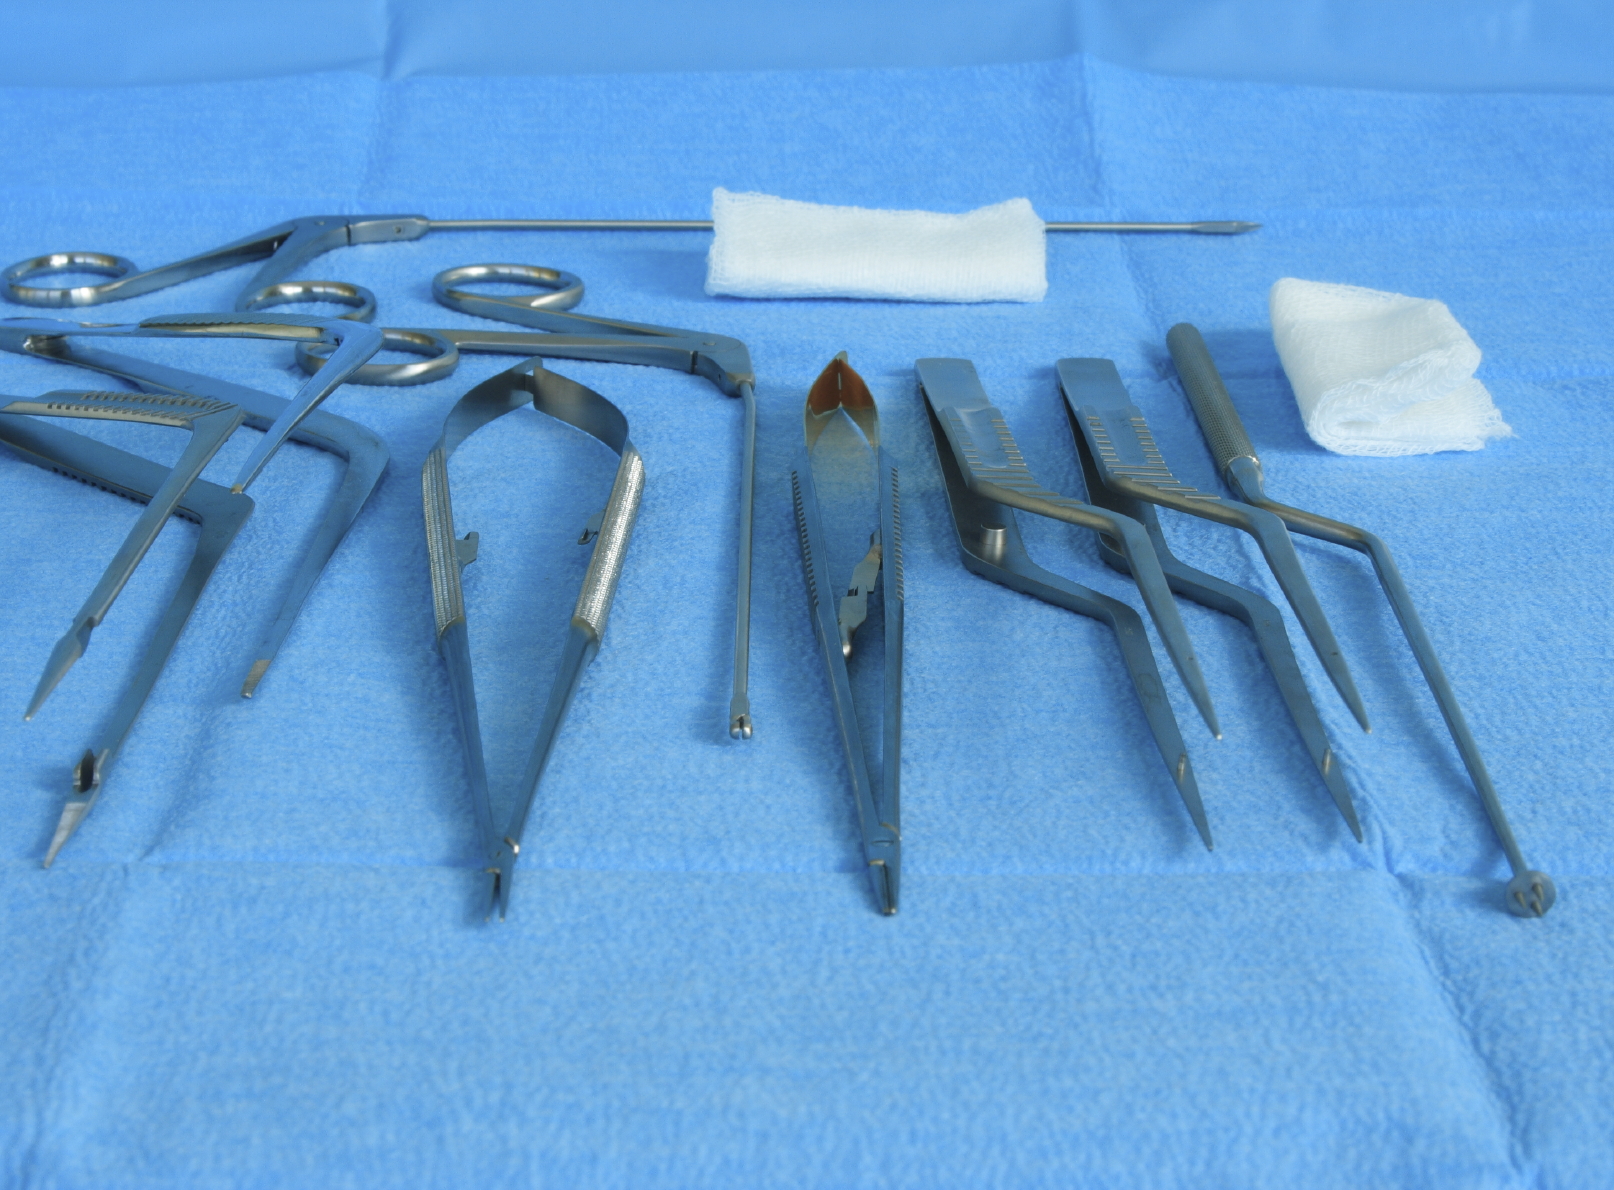 Surgical instruments laid out with guaze